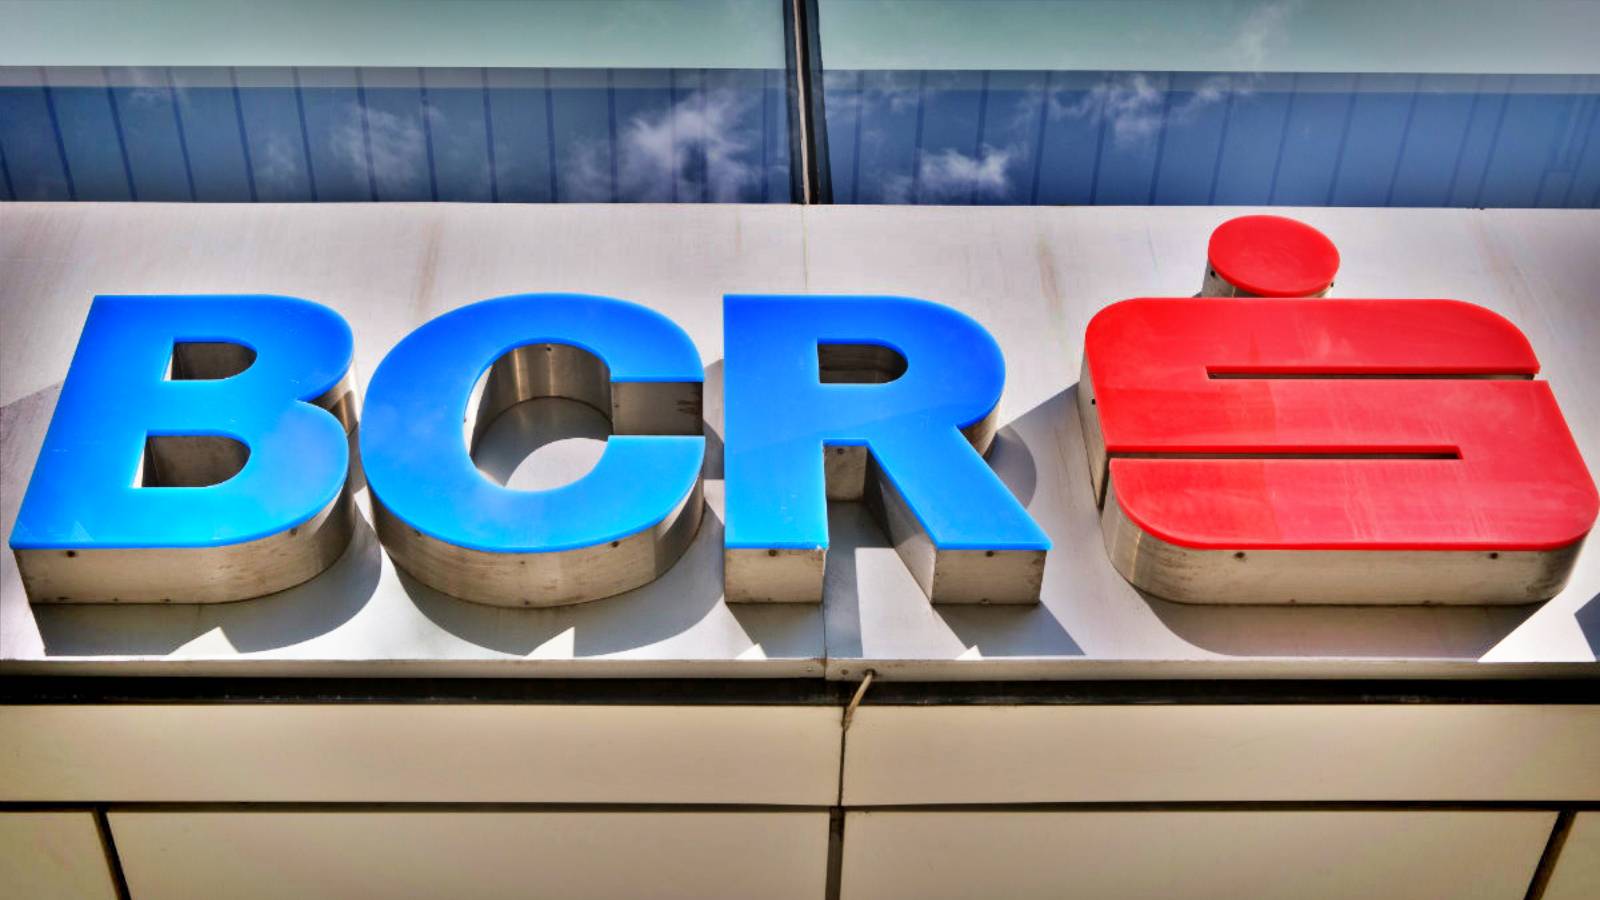 BCR Romania Serious Official CHANGES Revealed to All Romanian Customers